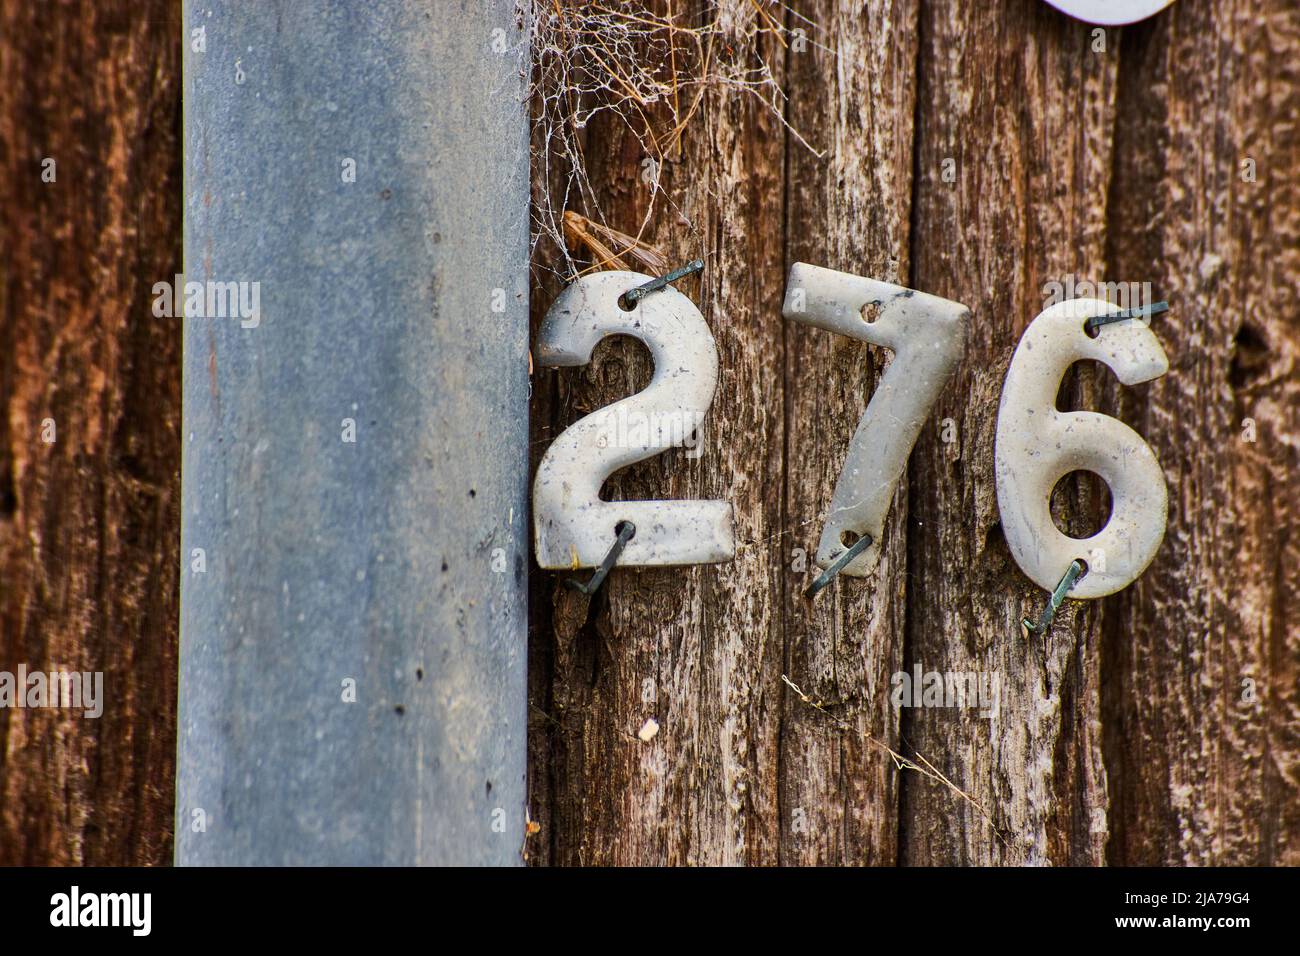 Detail of number 276 on wood telephone pole Stock Photo